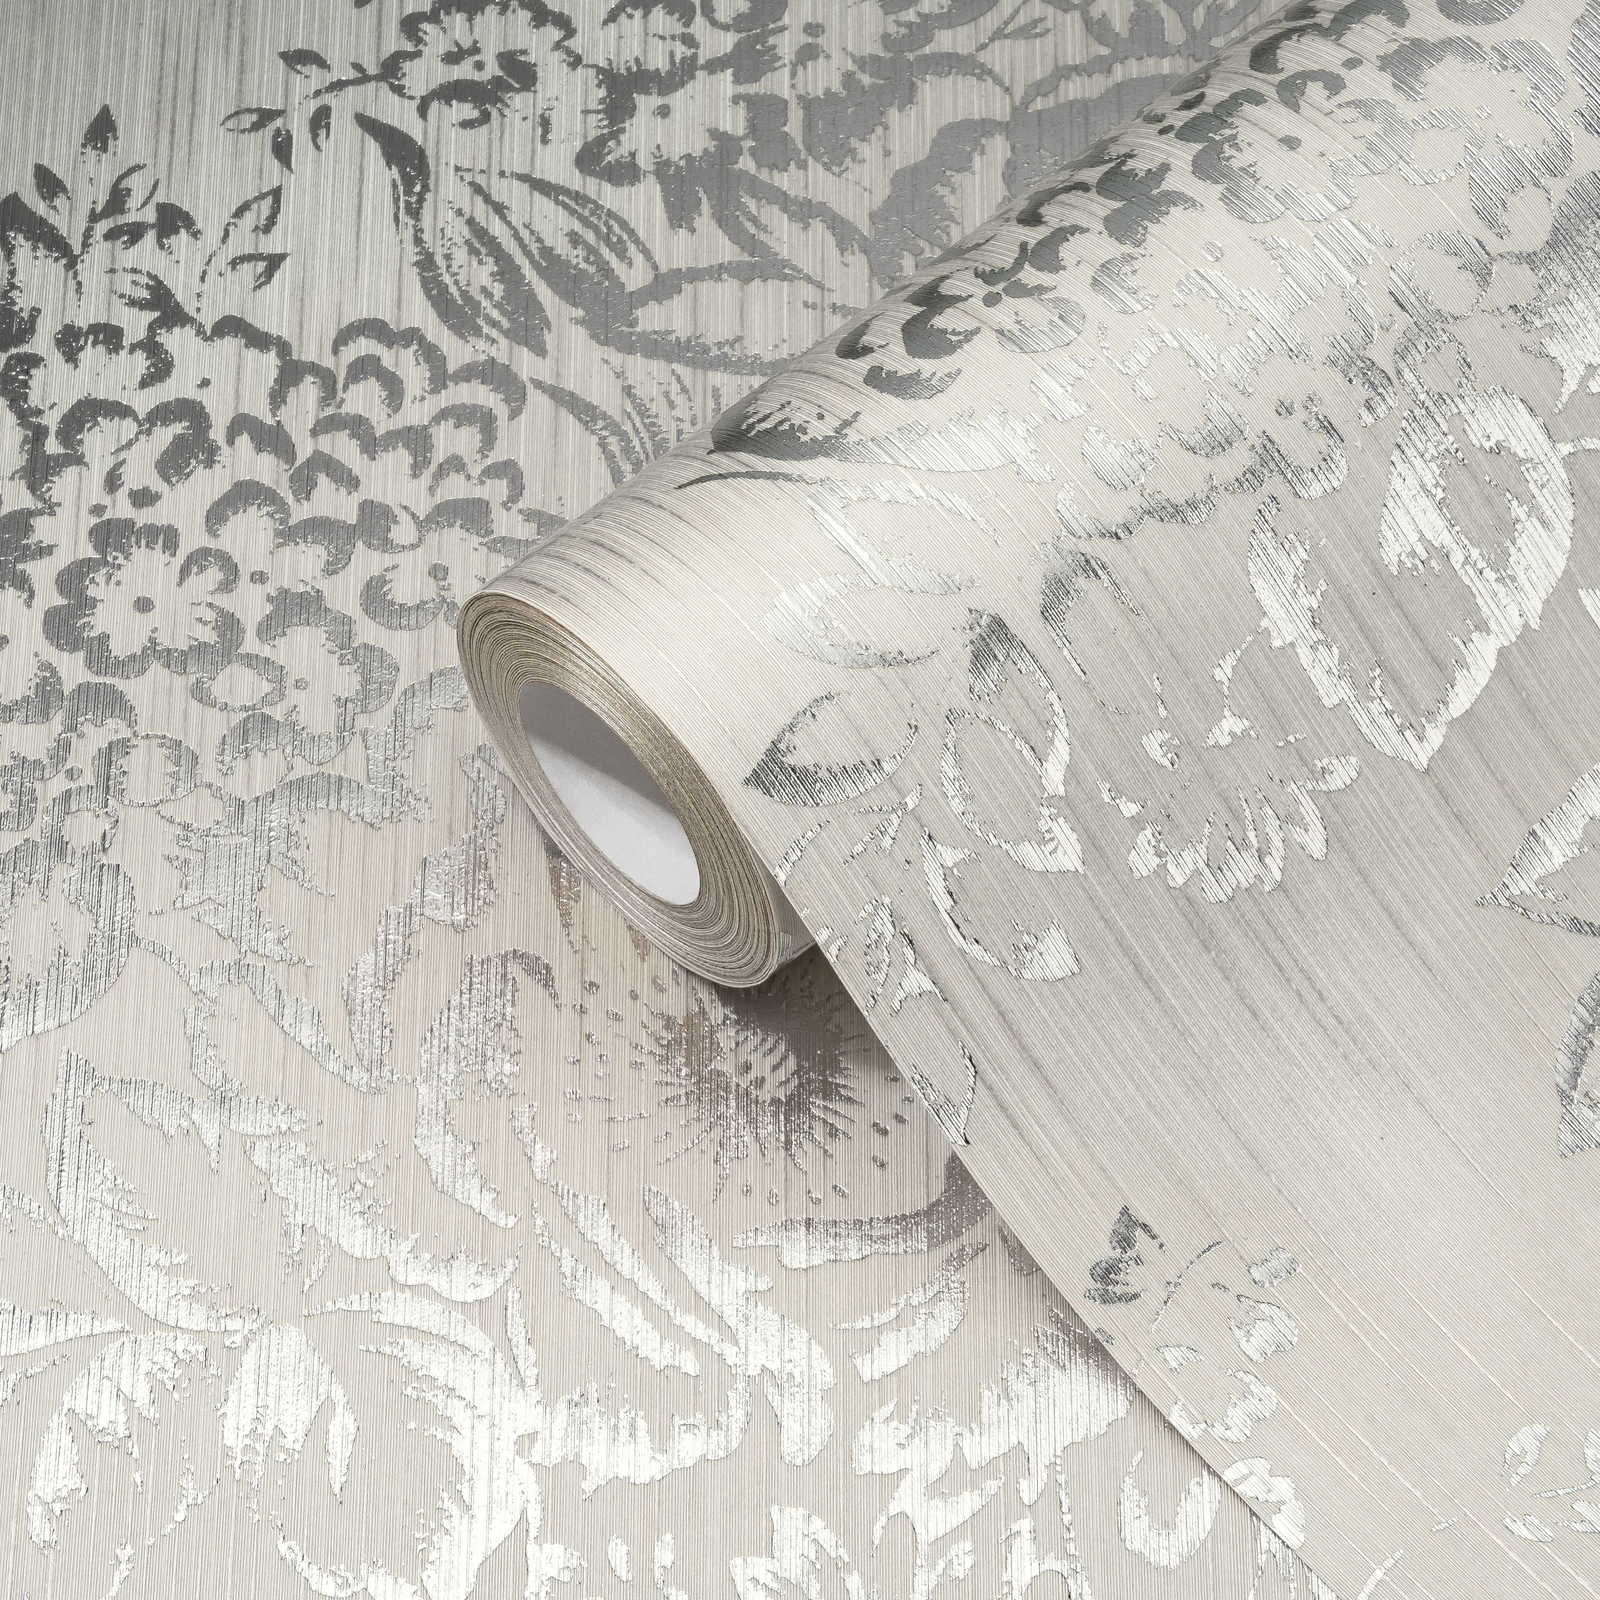             Textured wallpaper with silver floral pattern - silver, grey
        